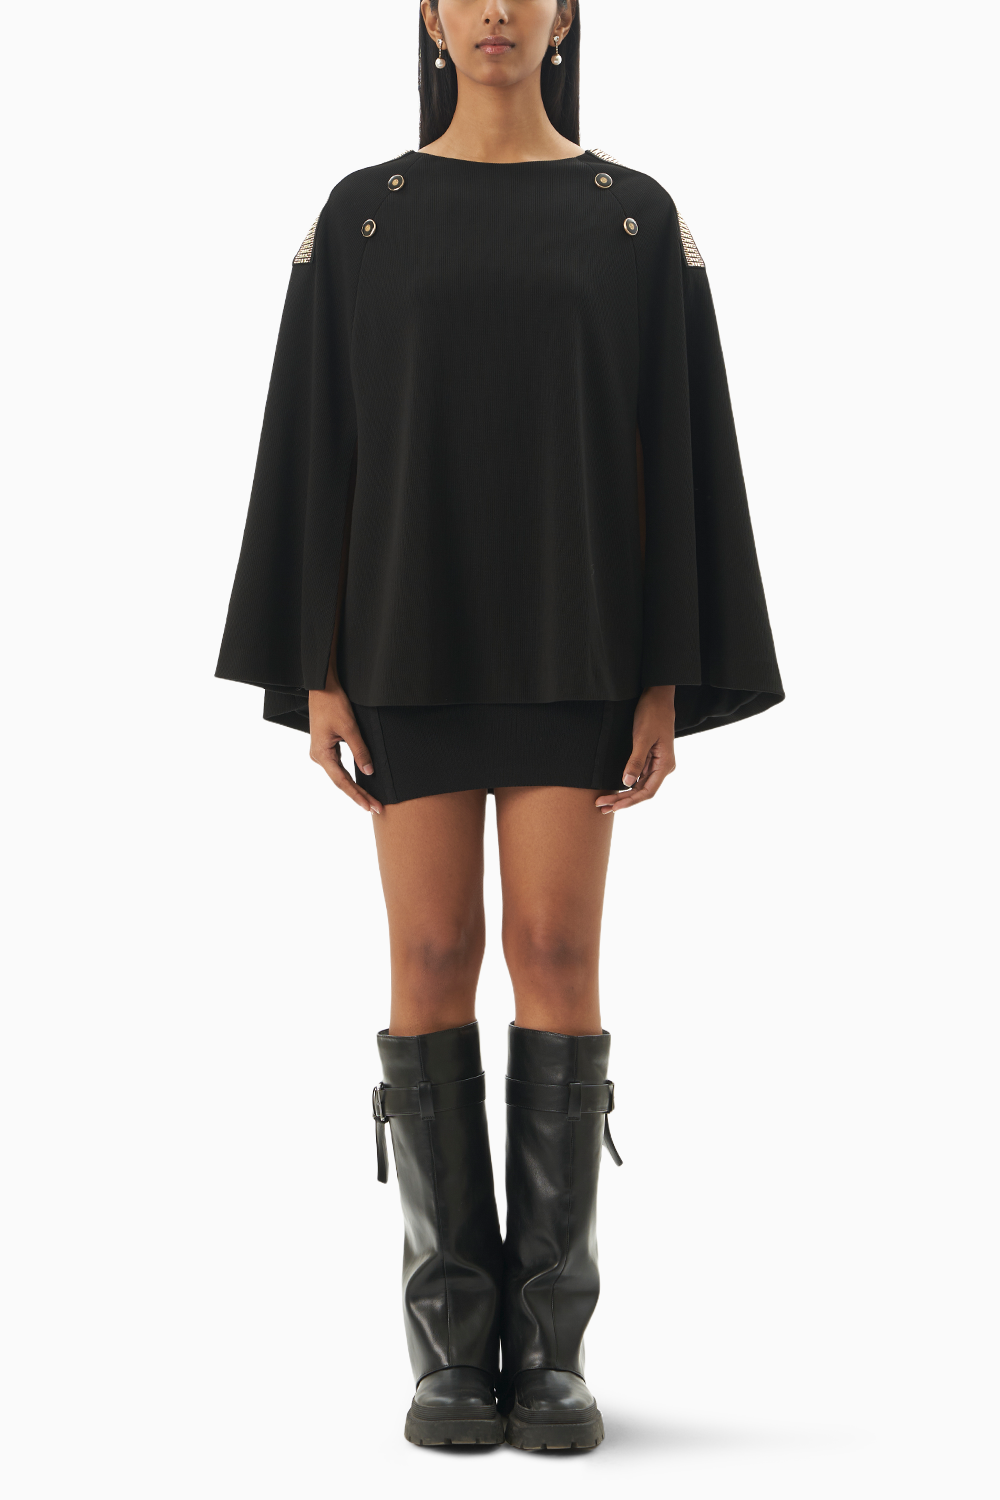 The Rosewood Cape